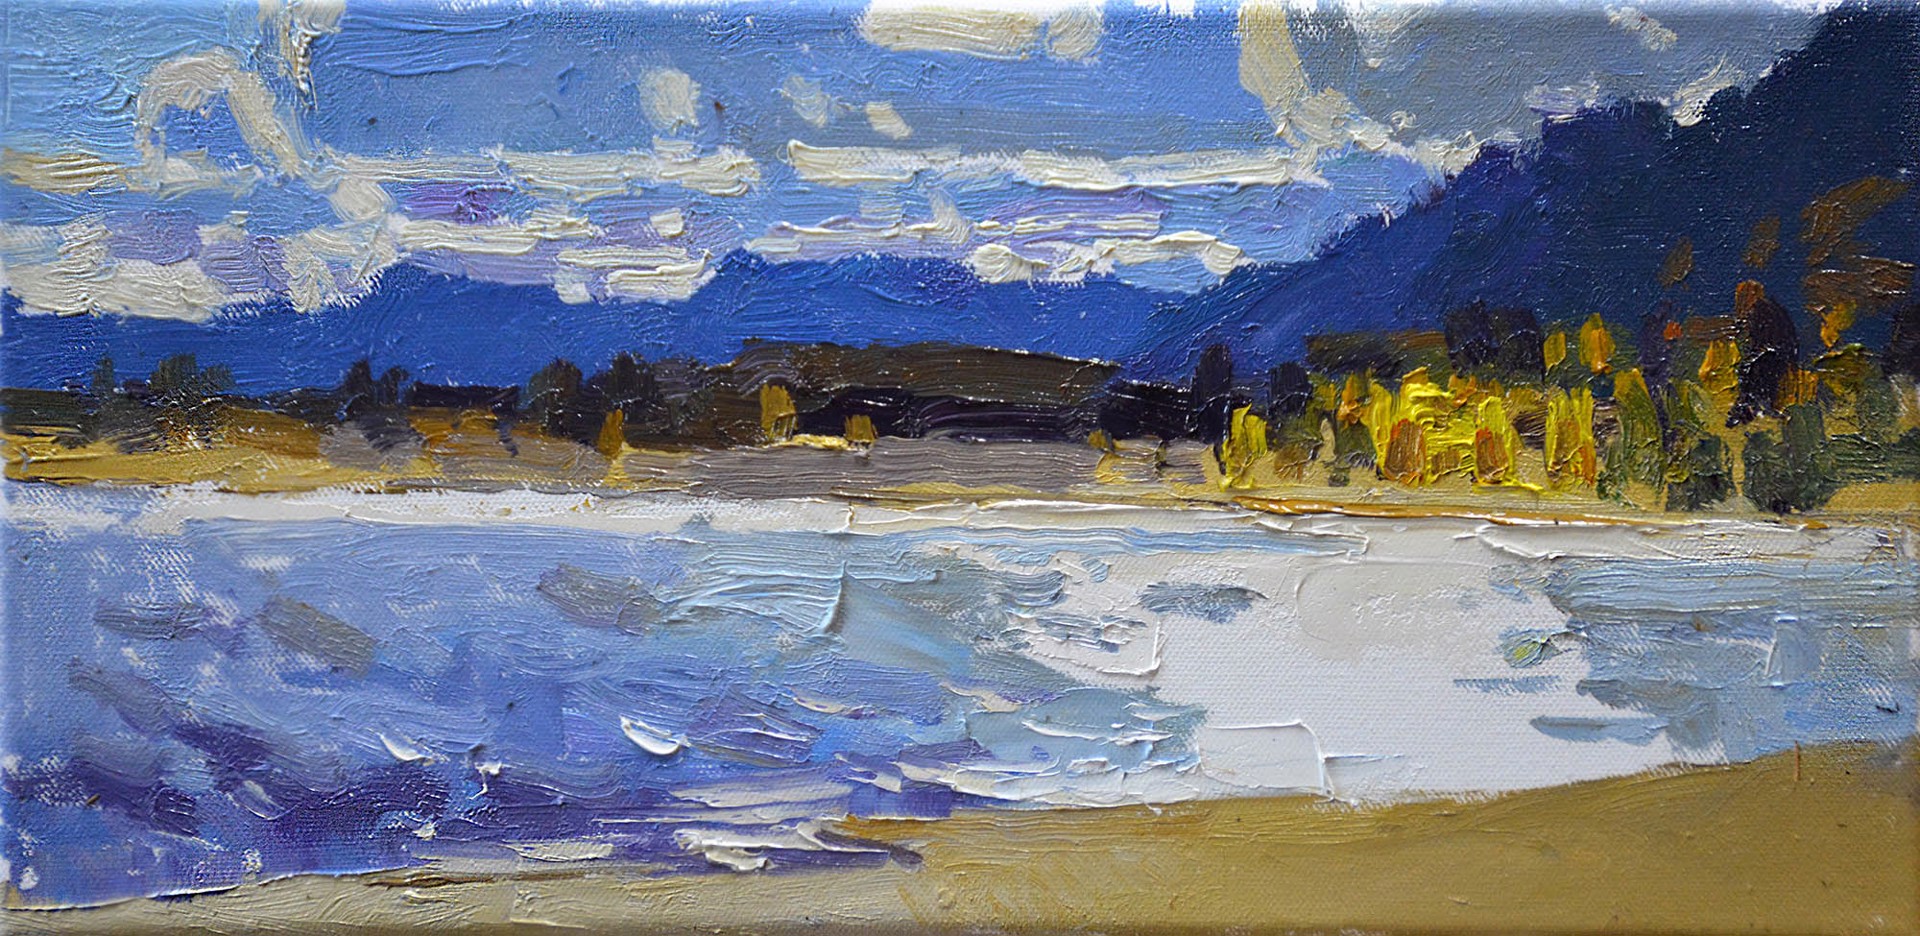 Original Oil Painting Featuring A Summer Landscape Of A Lake Surrounded By Mountains